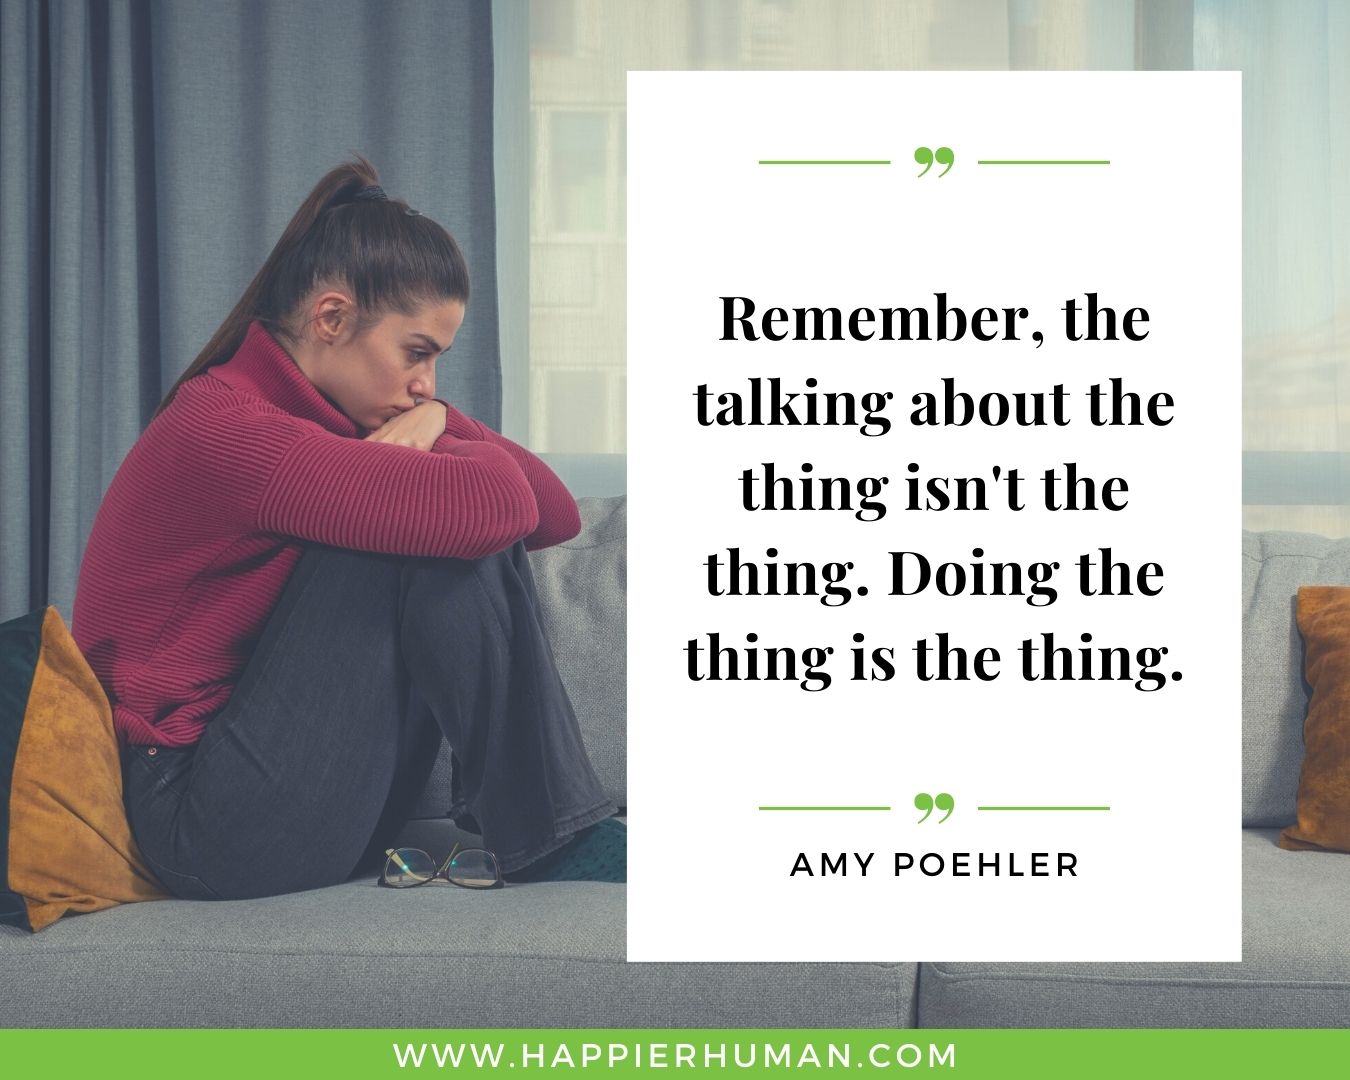 Overthinking Quotes - “Remember, the talking about the thing isn't the thing. Doing the thing is the thing.” - Amy Poehler